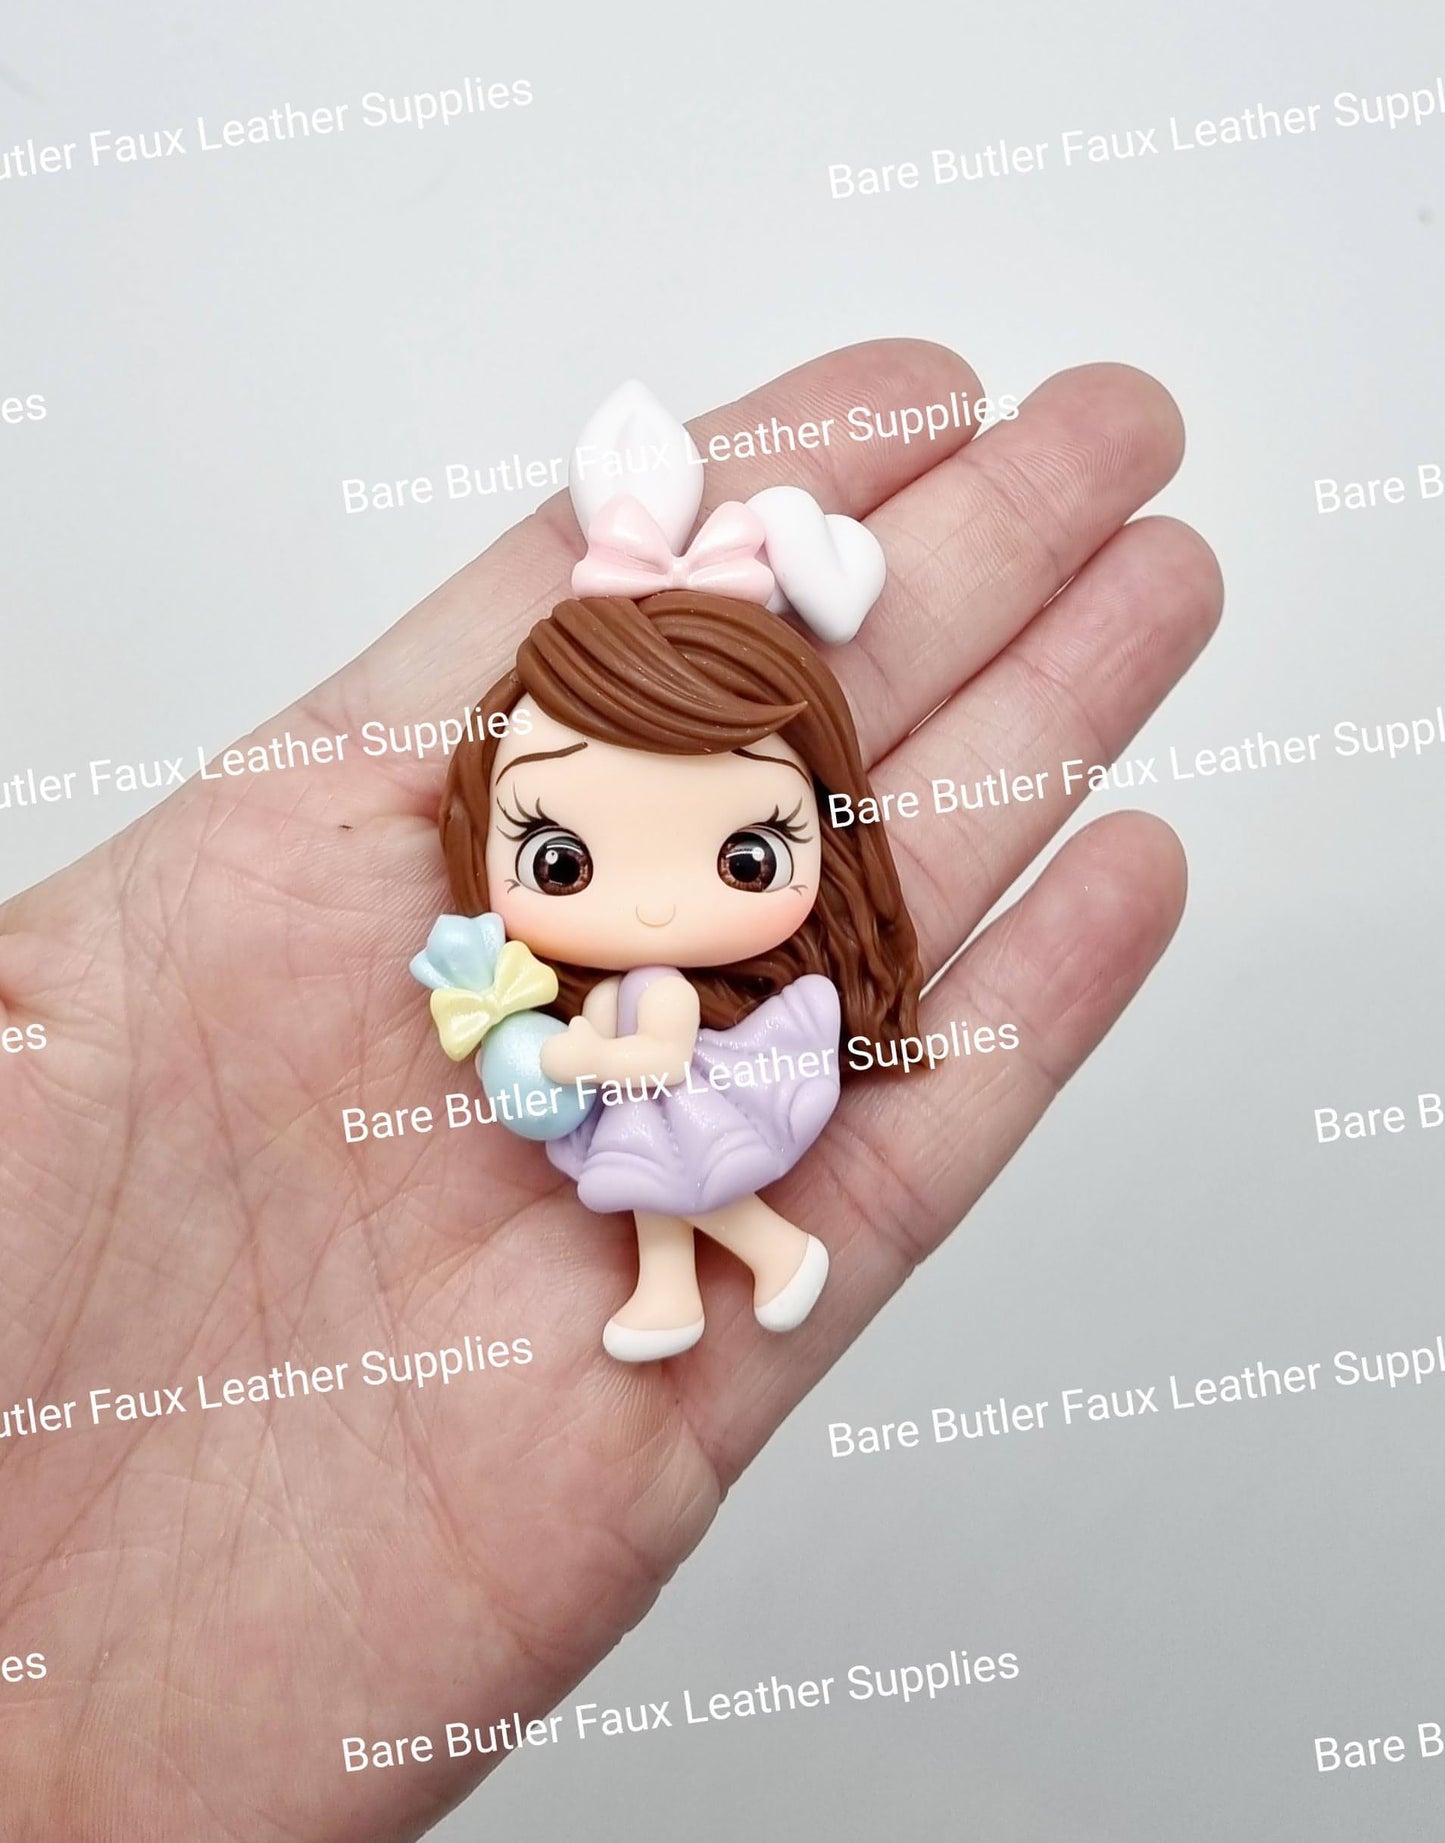 Girl with Rabbit - Bare Butler Faux Leather Supplies 